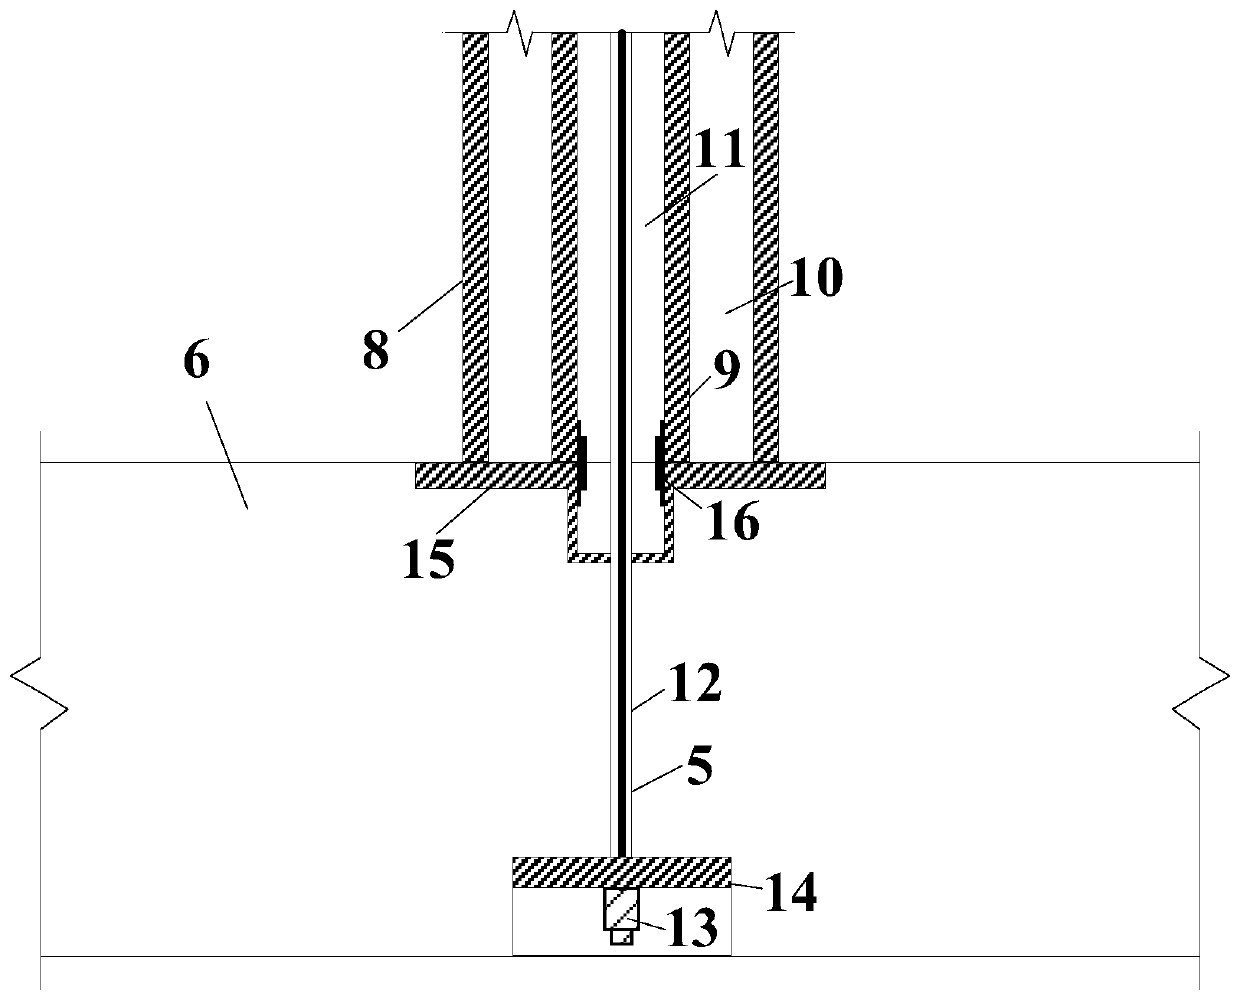 Energy-dissipating self-resetting double-layer rectangular hollow concrete filled steel tube concrete swinging pier structure system